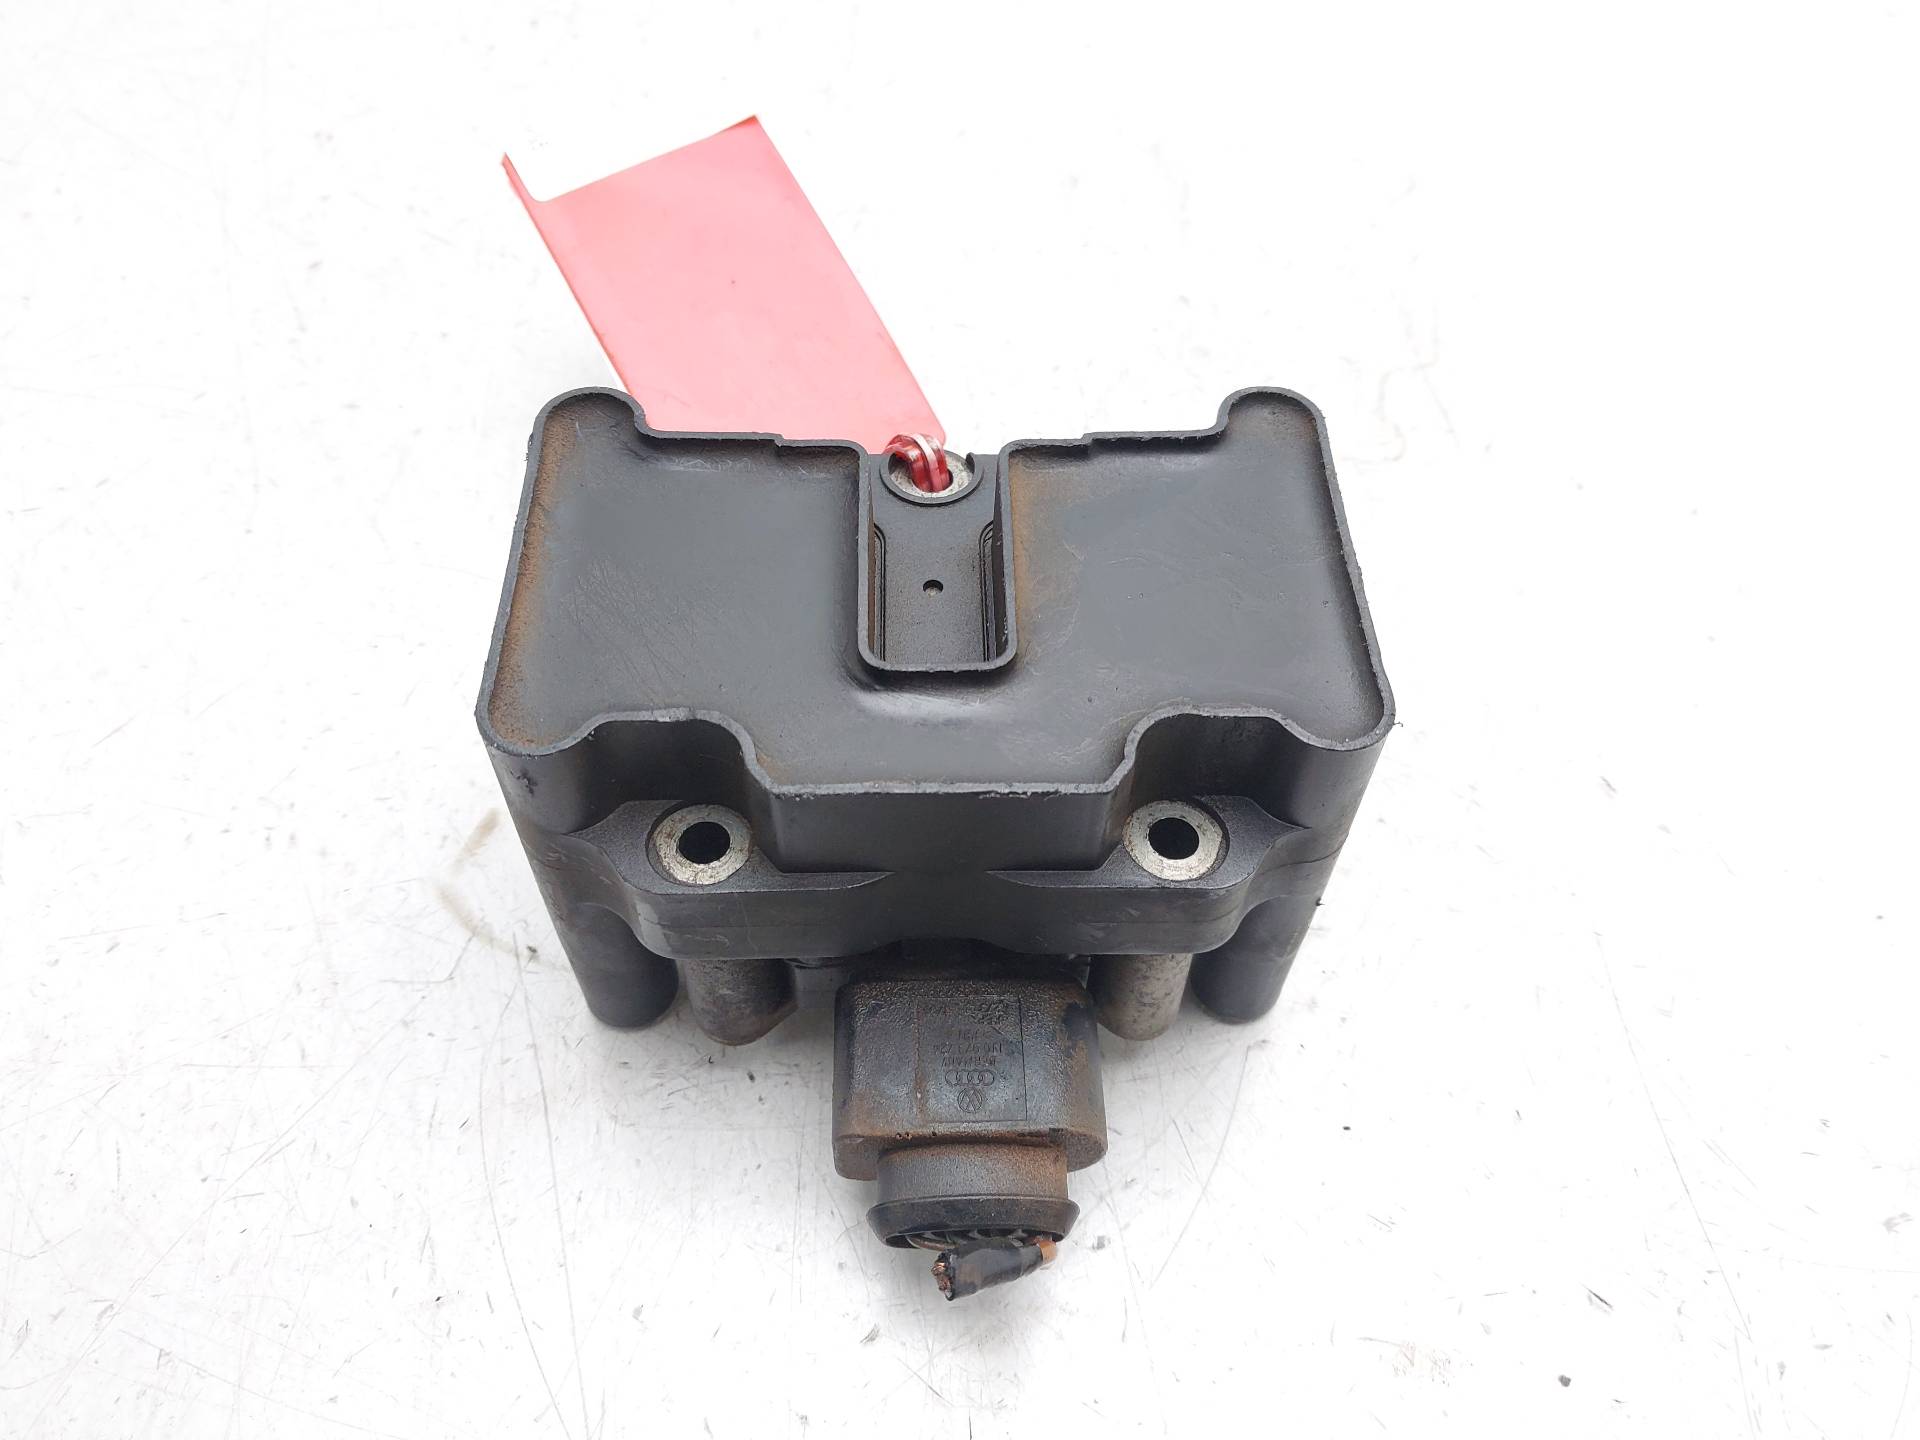 SEAT Cordoba 1 generation (1993-2003) High Voltage Ignition Coil 032905106F 23327109